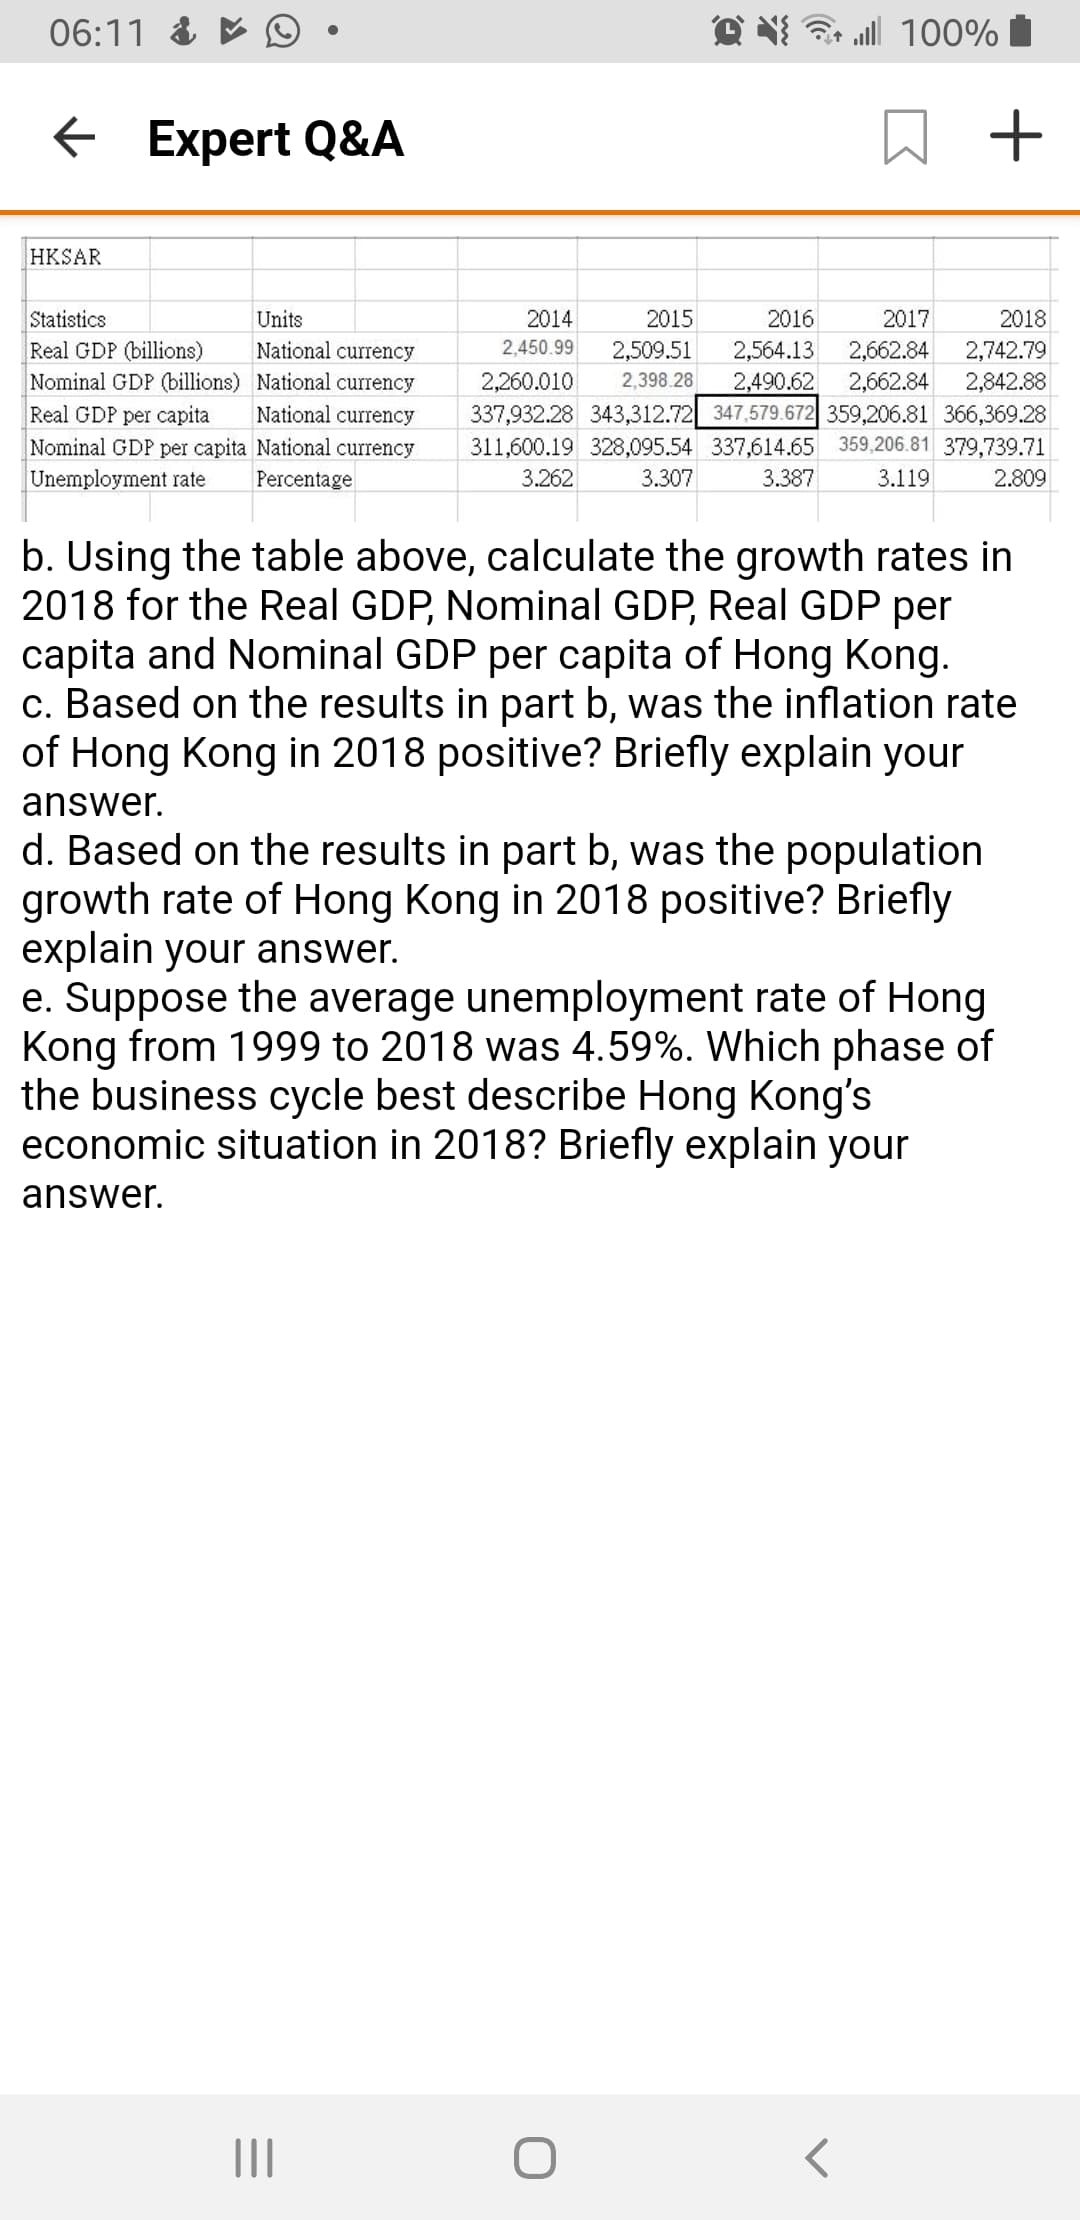 06:11 & M
N{ al 100%
E Expert Q&A
HKSAR
Statistics
Units
2014
2015
2016
2017
2018
Real GDP (billions)
National currency
2,450.99
2,509.51
2,742.79
2,842.88
337,932.28 343,312.72 347,579.672 359,206.81 366,369.28
2,564.13
2,662.84
Nominal GDP (billions) National currency
2,260.010
2,398.28
2,490.62
2,662.84
National currency
Real GDP per capita
Nominal GDP per capita National currency
311,600.19 328,095.54 337,614.65 359,206.81 379,739.71
Unemployment rate
Percentage
3.262
3.307
3.387
3.119
2.809
b. Using the table above, calculate the growth rates in
2018 for the Real GDP, Nominal GDP, Real GDP per
capita and Nominal GDP per capita of Hong Kong.
c. Based on the results in part b, was the inflation rate
of Hong Kong in 2018 positive? Briefly explain your
answer.
d. Based on the results in part b, was the population
growth rate of Hong Kong in 2018 positive? Briefly
explain your answer.
e. Suppose the average unemployment rate of Hong
Kong from 1999 to 2018 was 4.59%. Which phase of
the business cycle best describe Hong Kong's
economic situation in 2018? Briefly explain your
answer.
II
